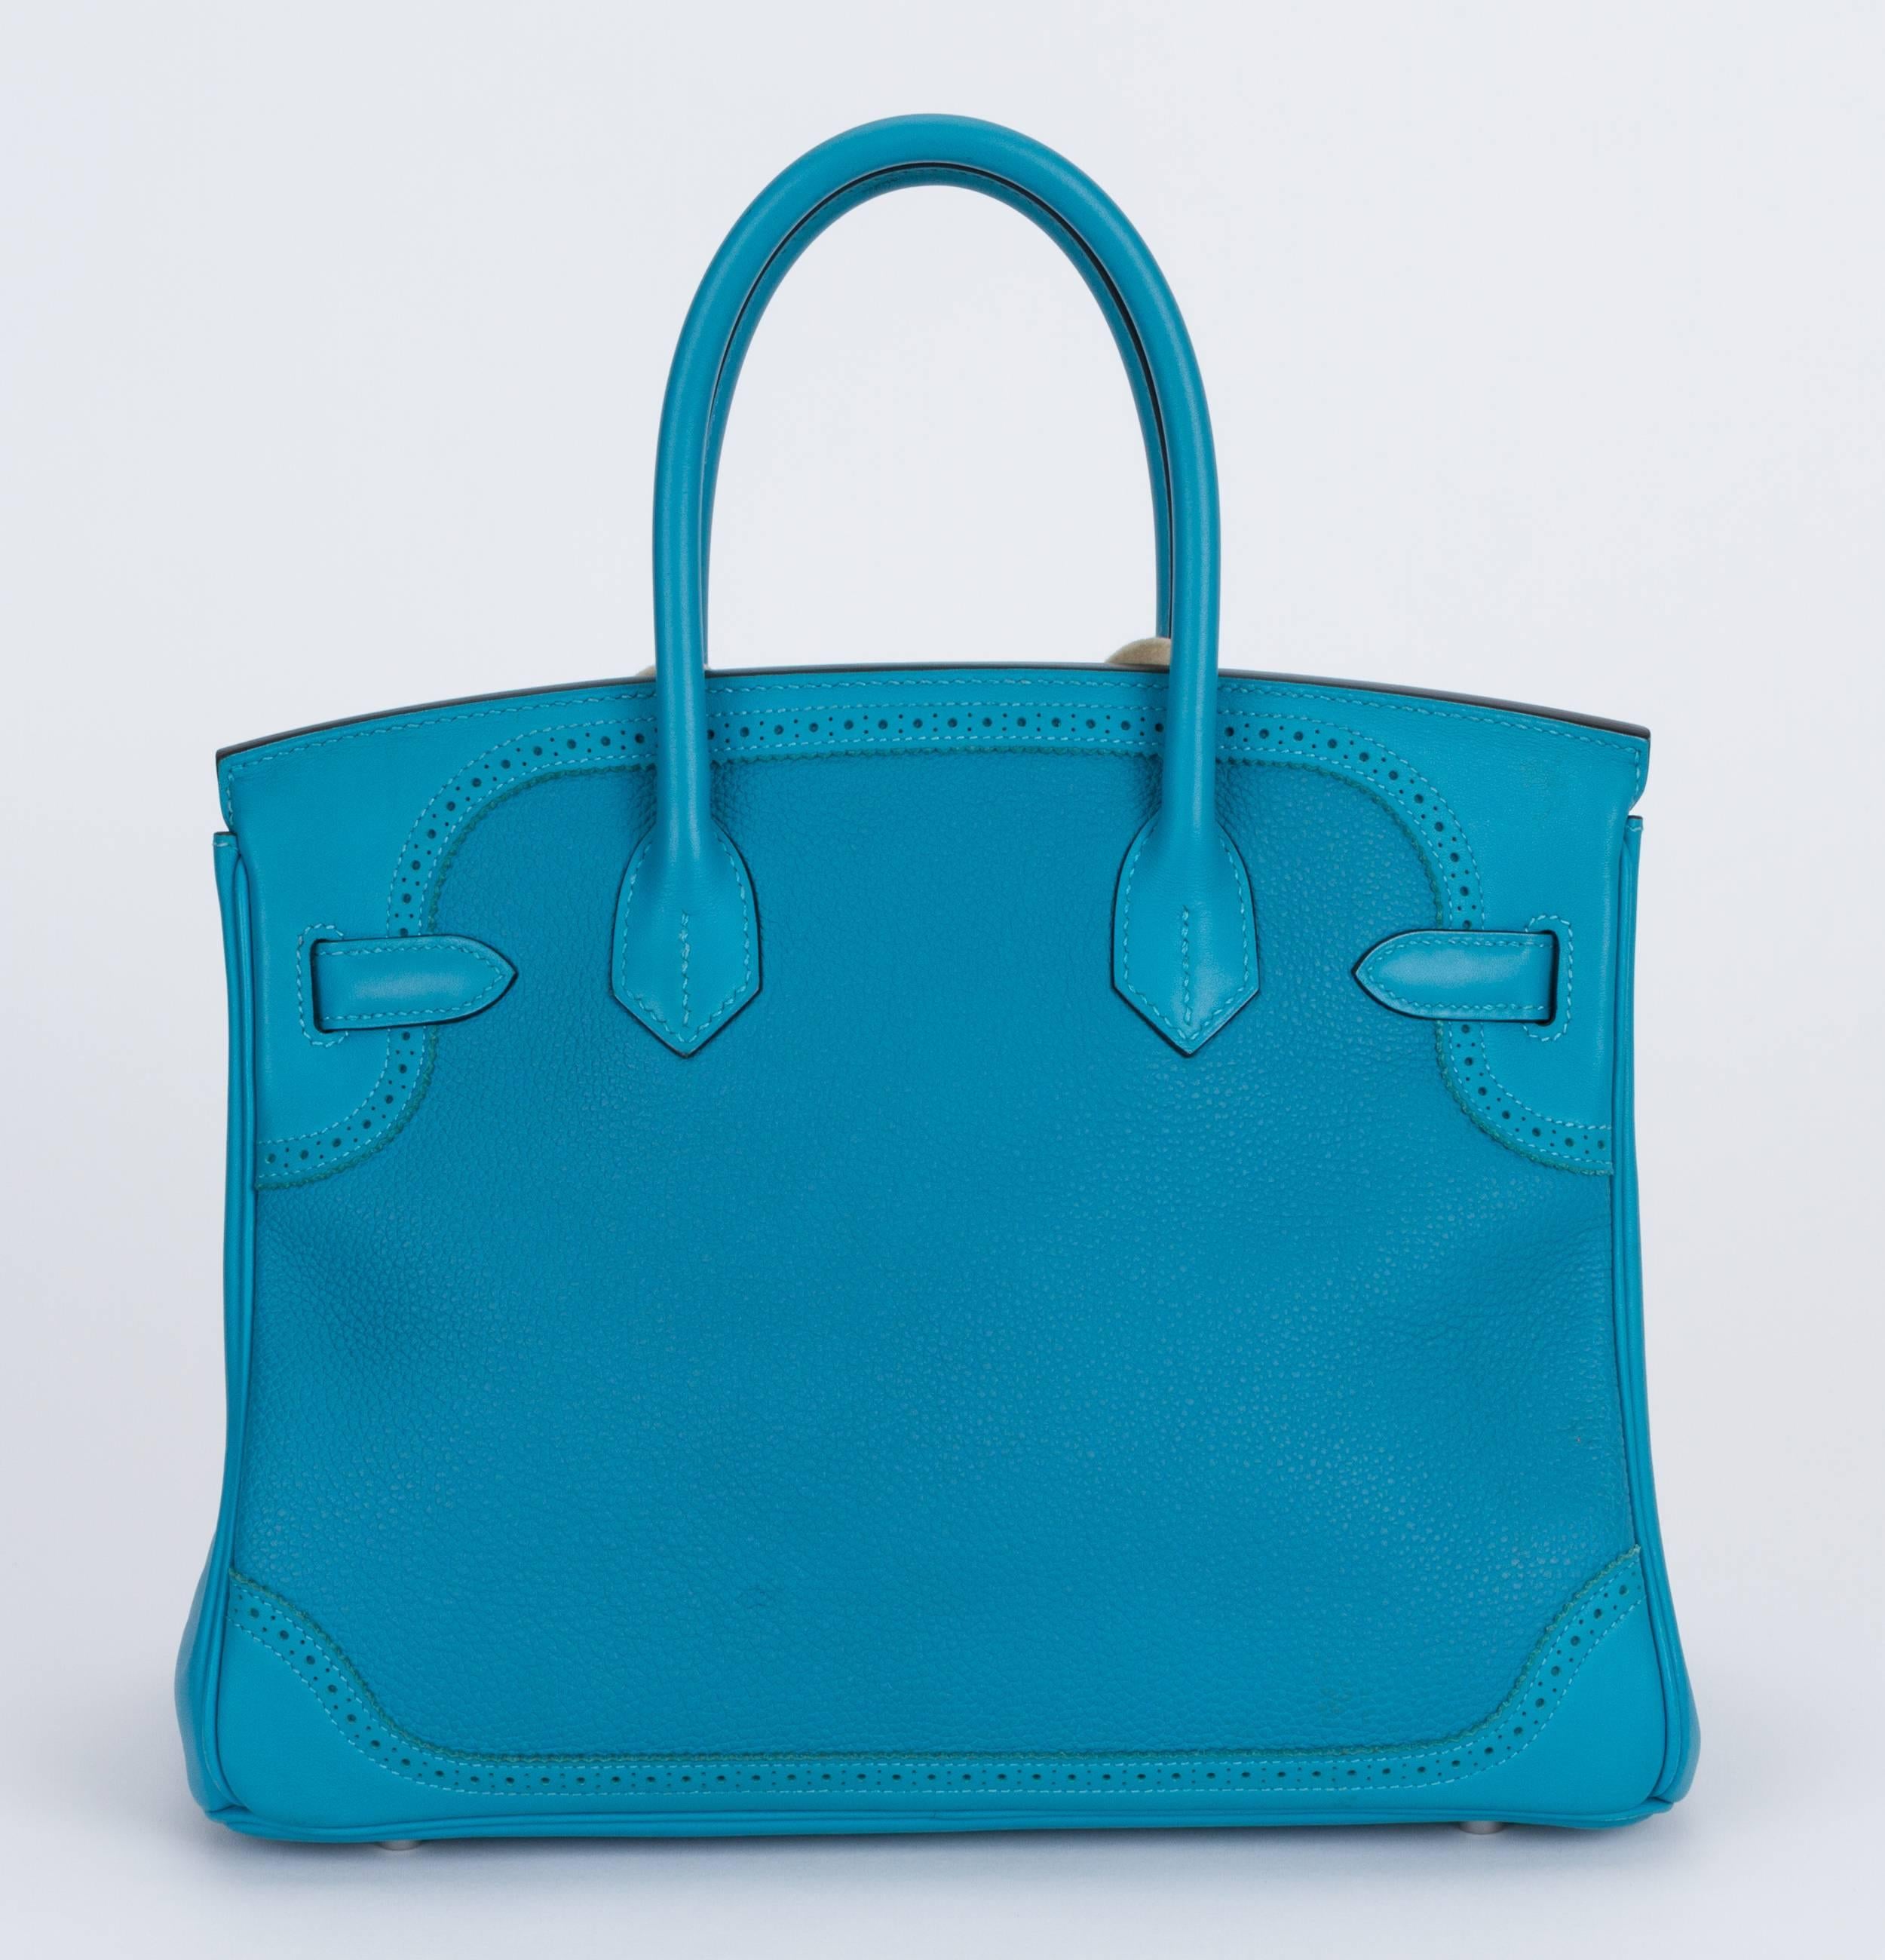 Hermès 30cm Ghillies Birkin in turquoise Togo and swift leather with palladium hardware. T stamp for 2015. Handle drop, 4